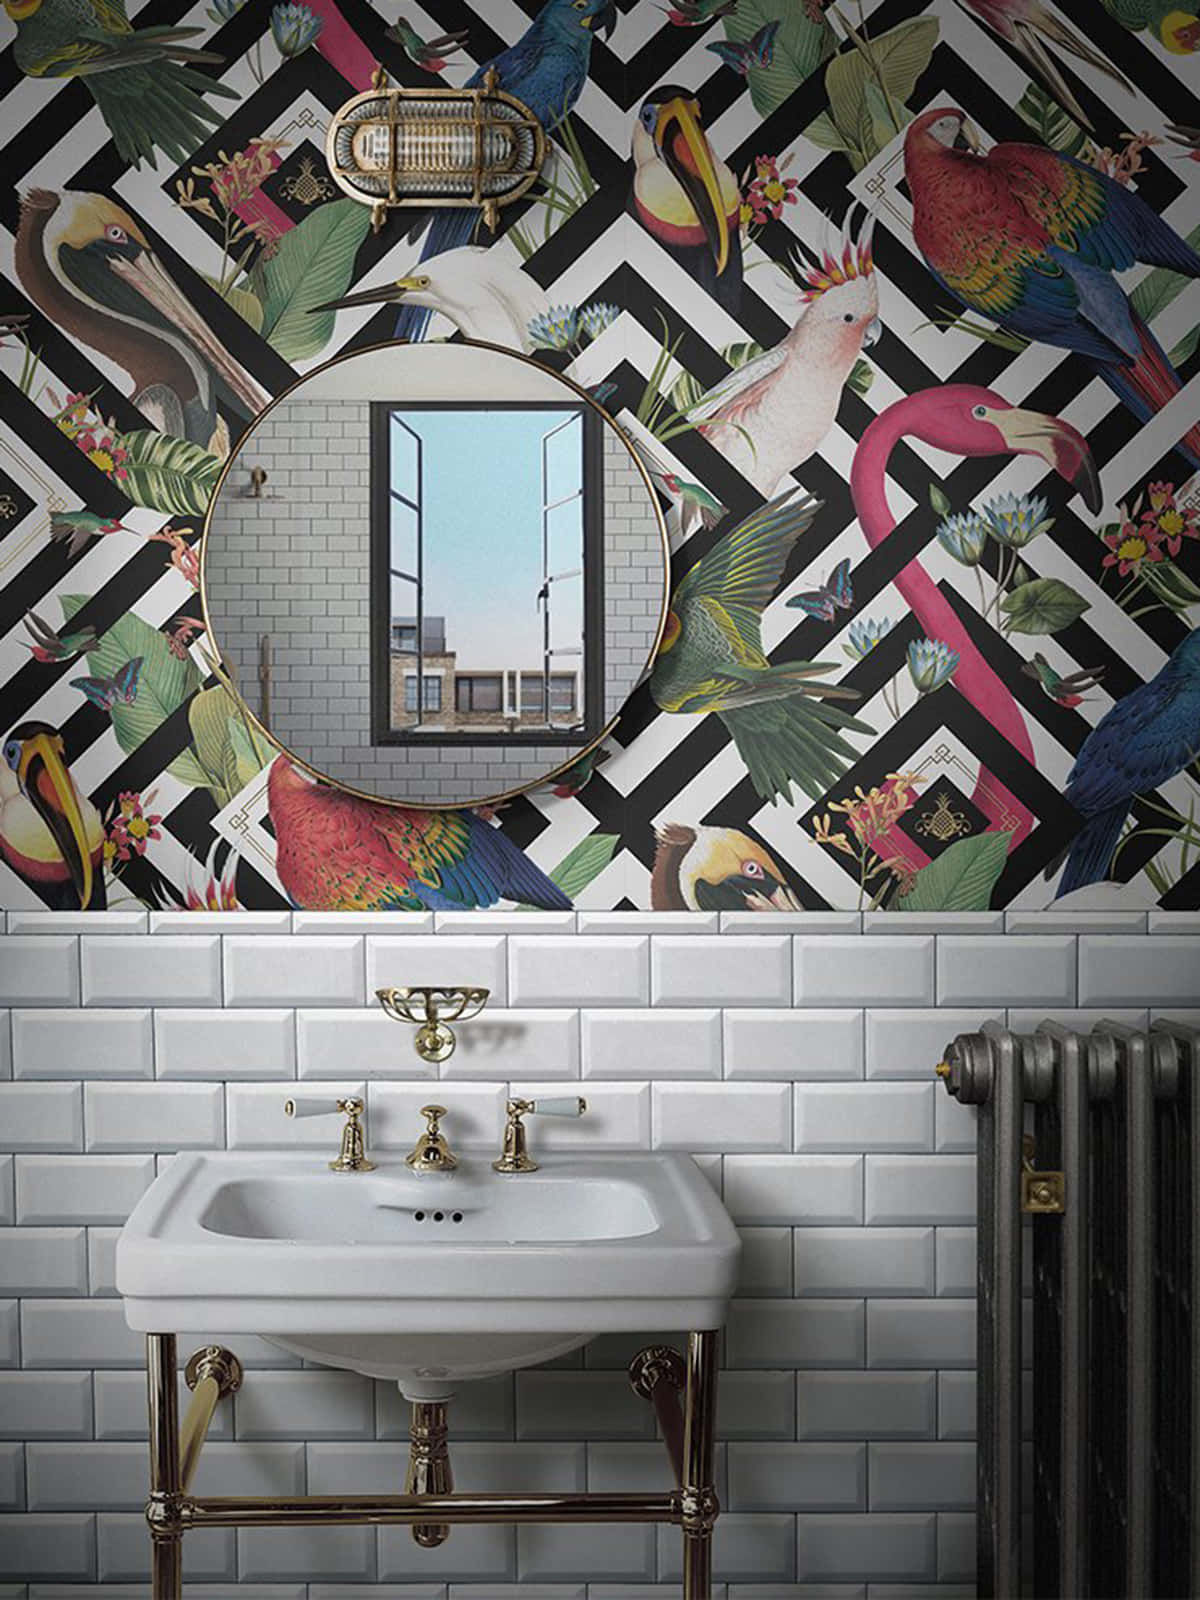 A Monochromatic Collage of Tiles Perfect for Your Home